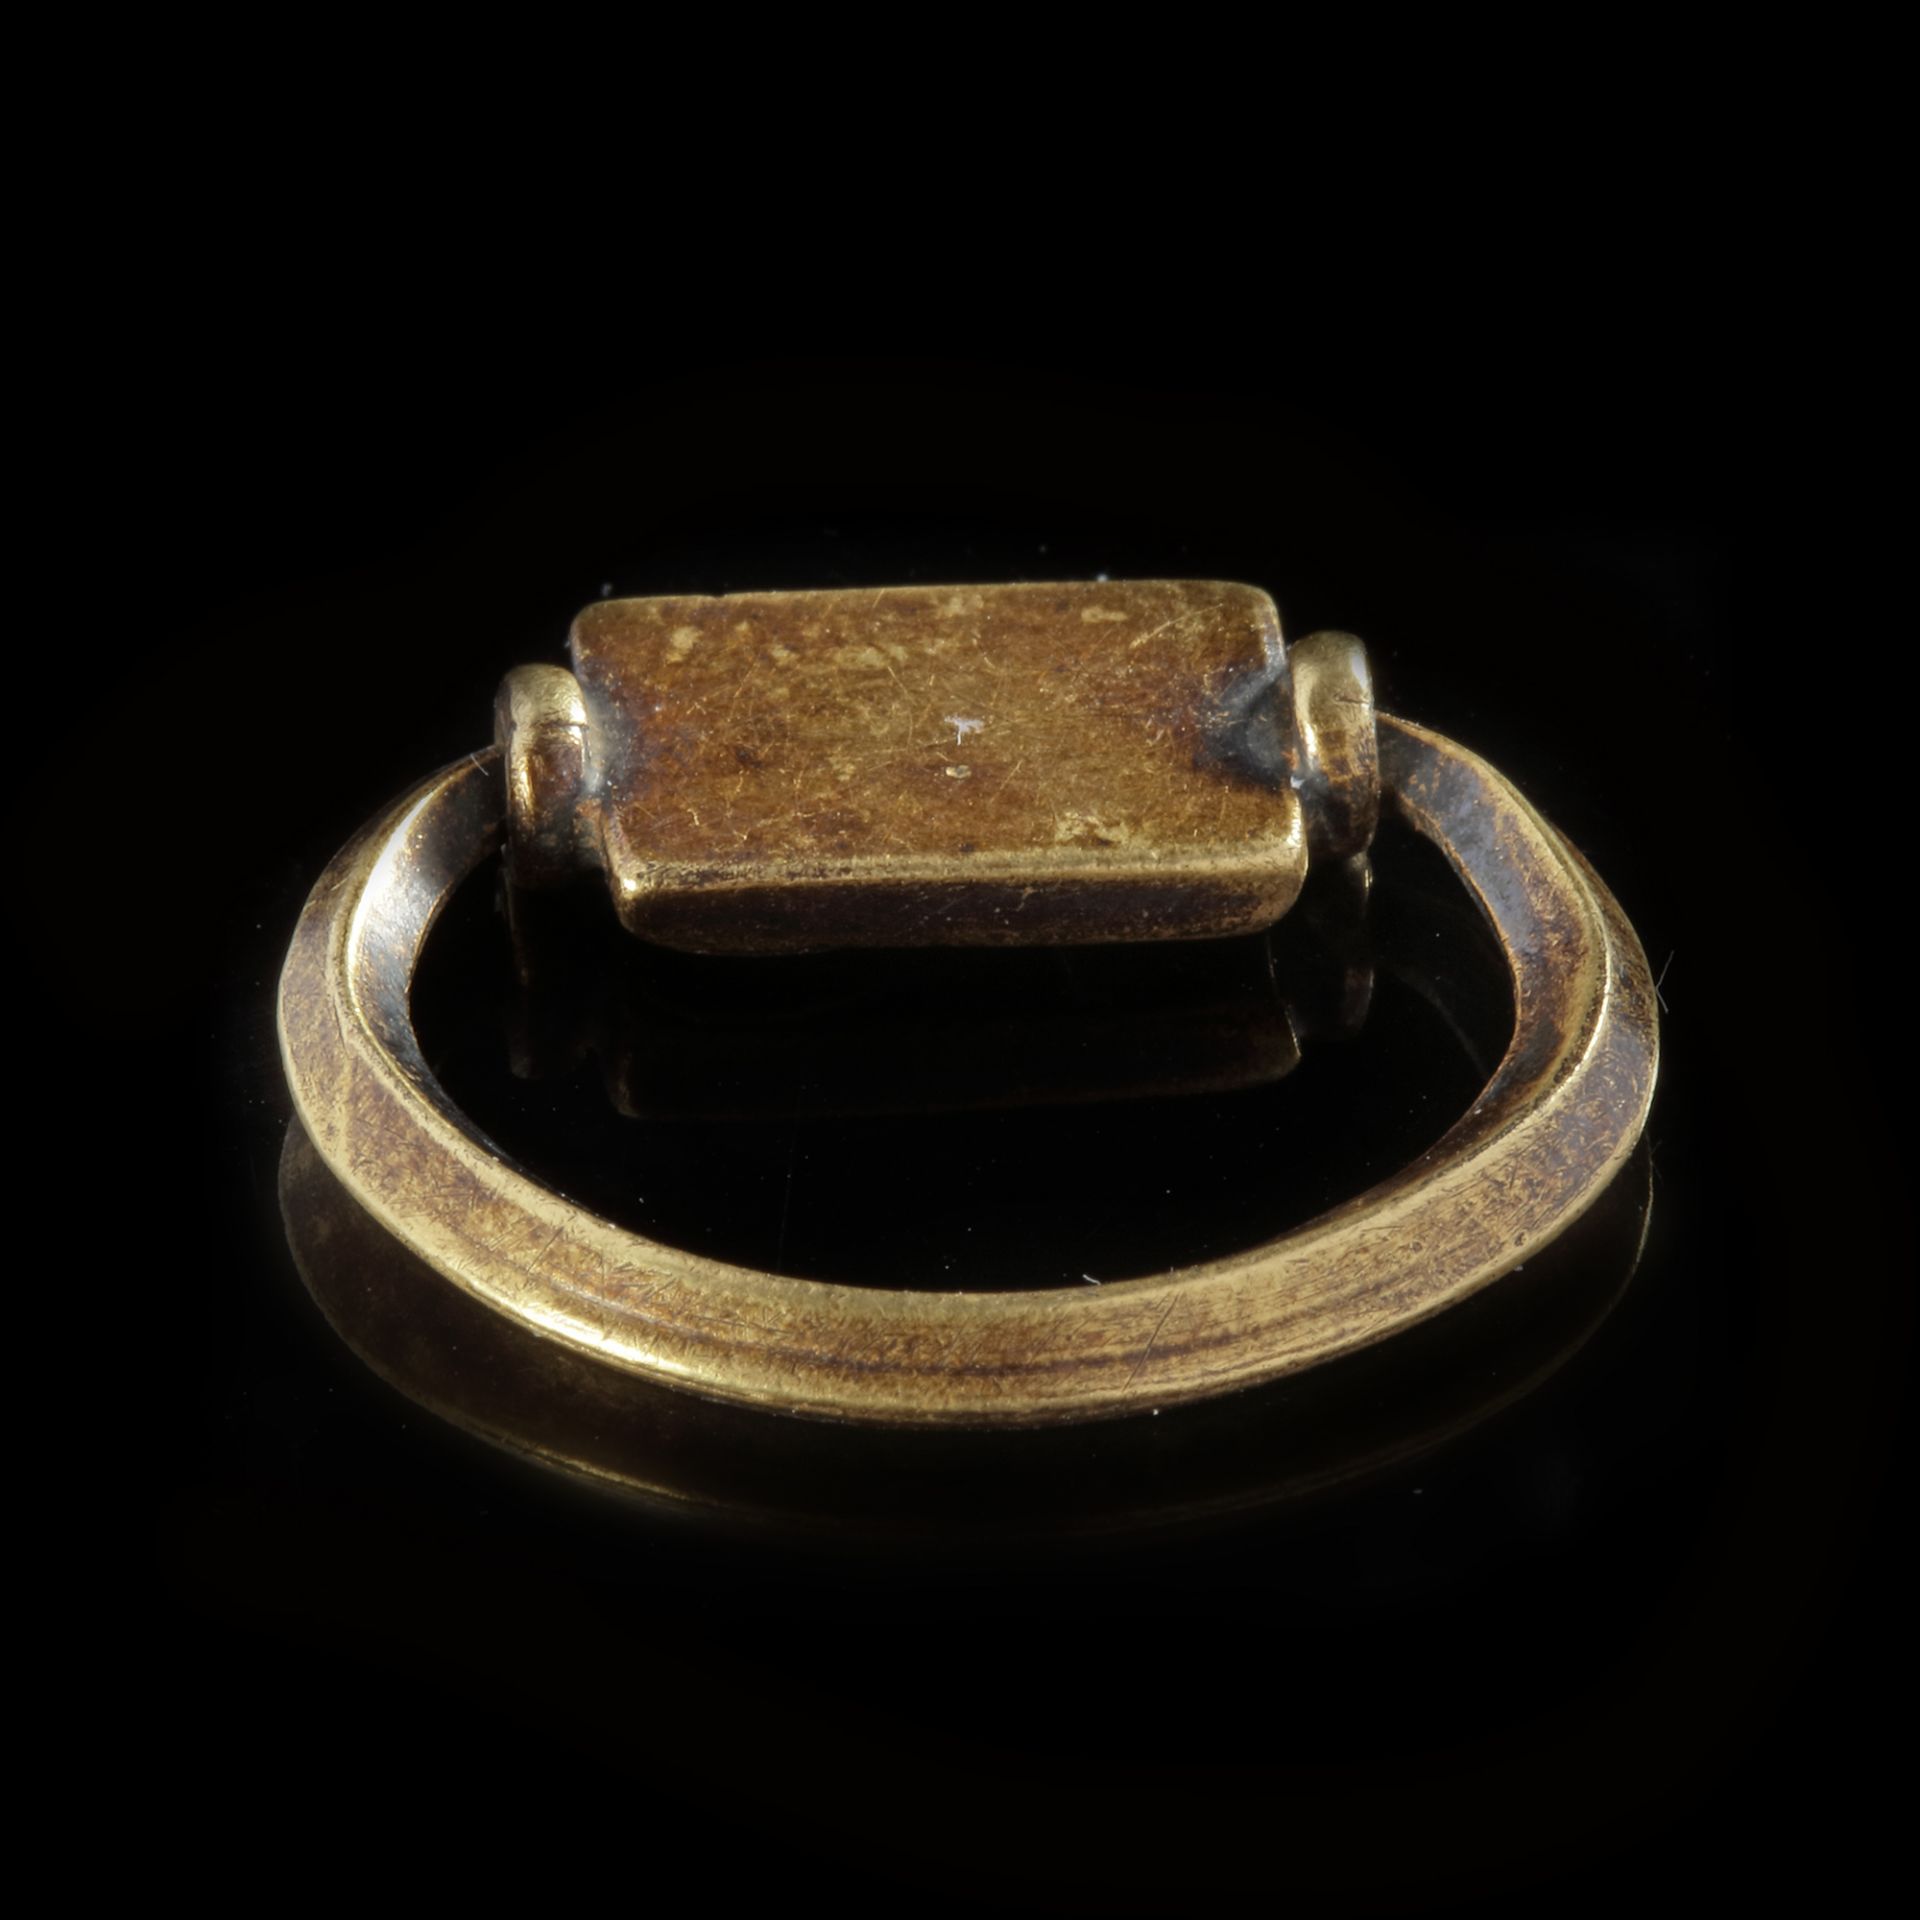 A PHOENICIAN RING IN GOLD WITH AN EYE OF HORUS, 6TH-7TH CENTURY CENTURY BC - Image 3 of 4